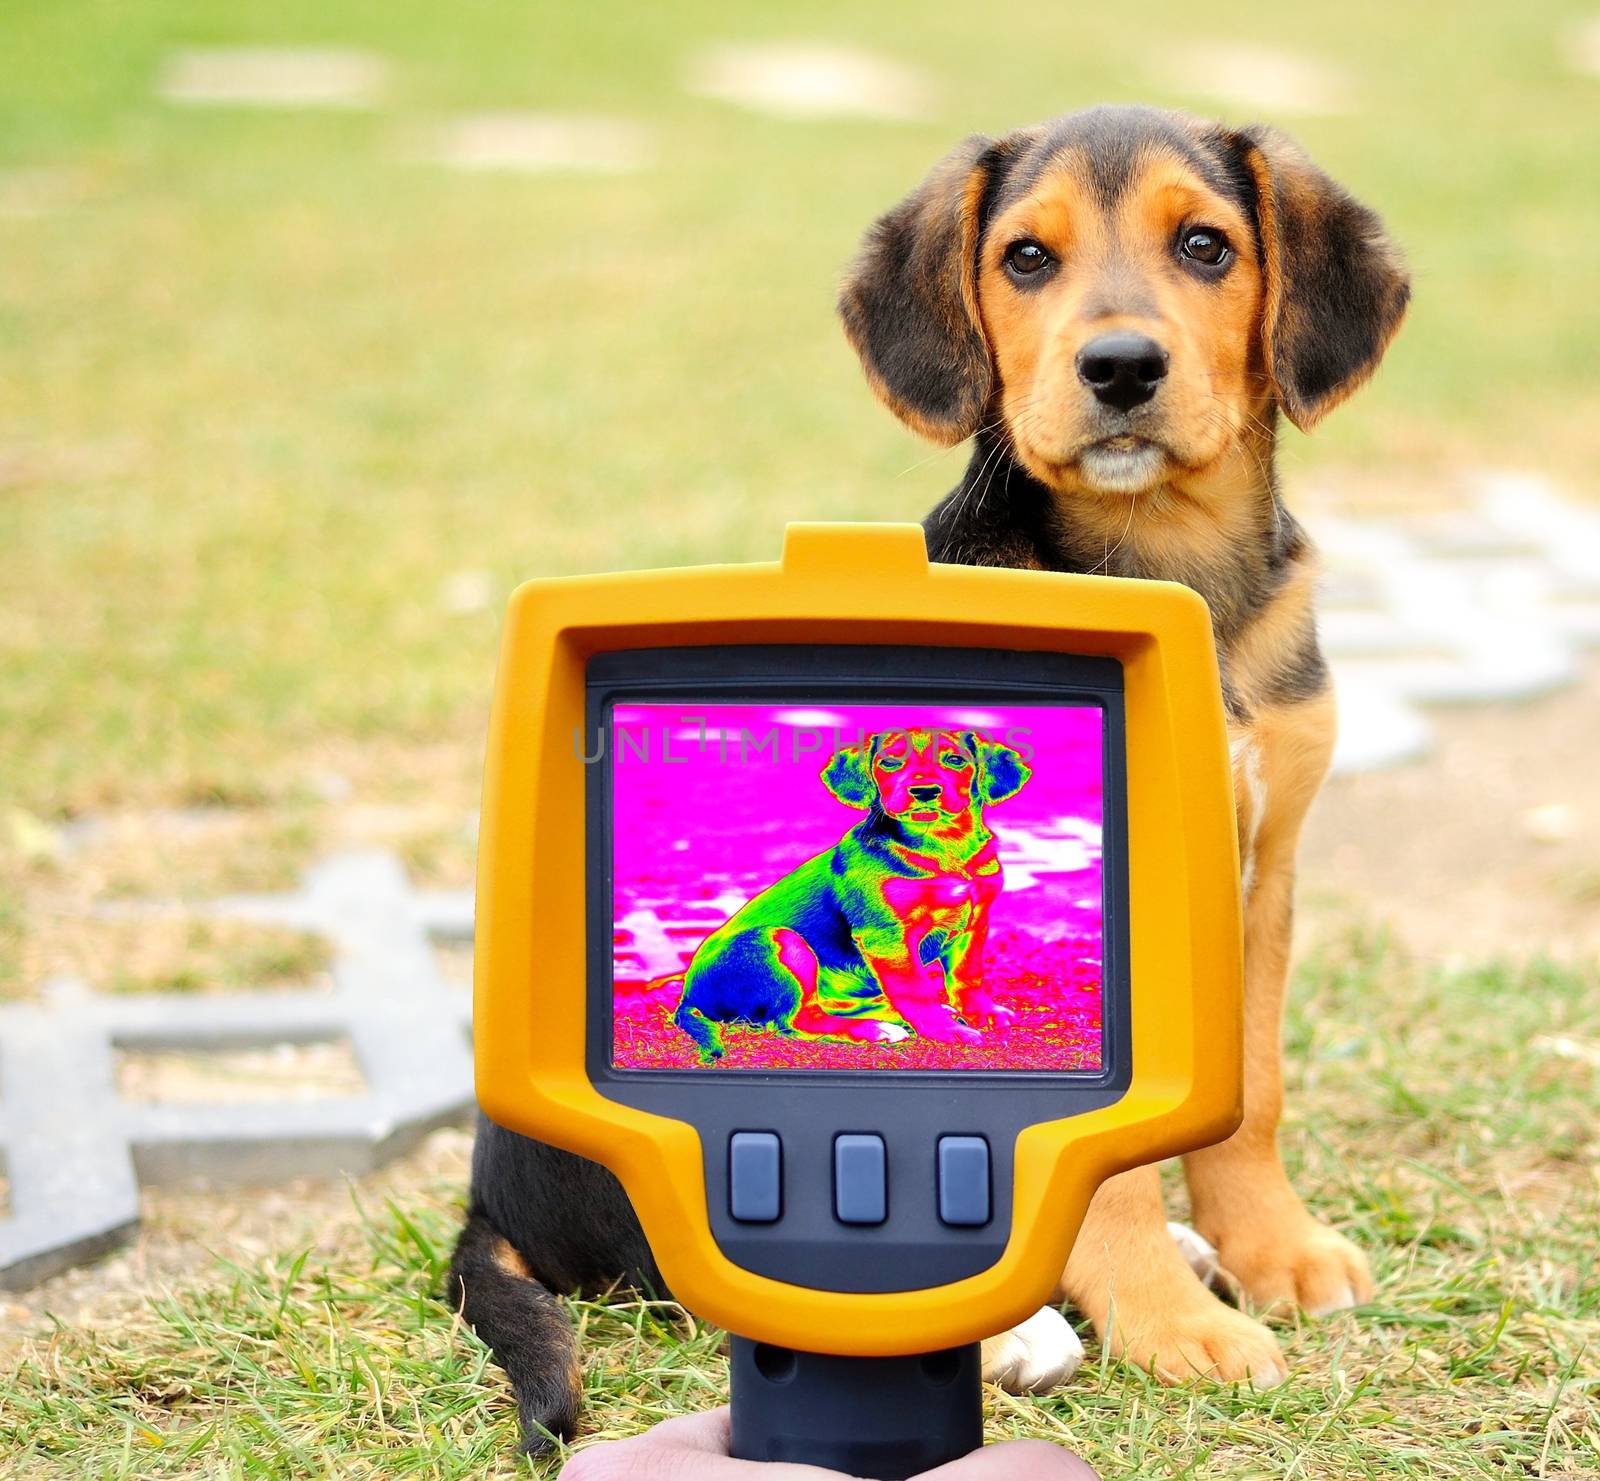 Dog Heat Loss Recording with Infrared Thermal Camera.